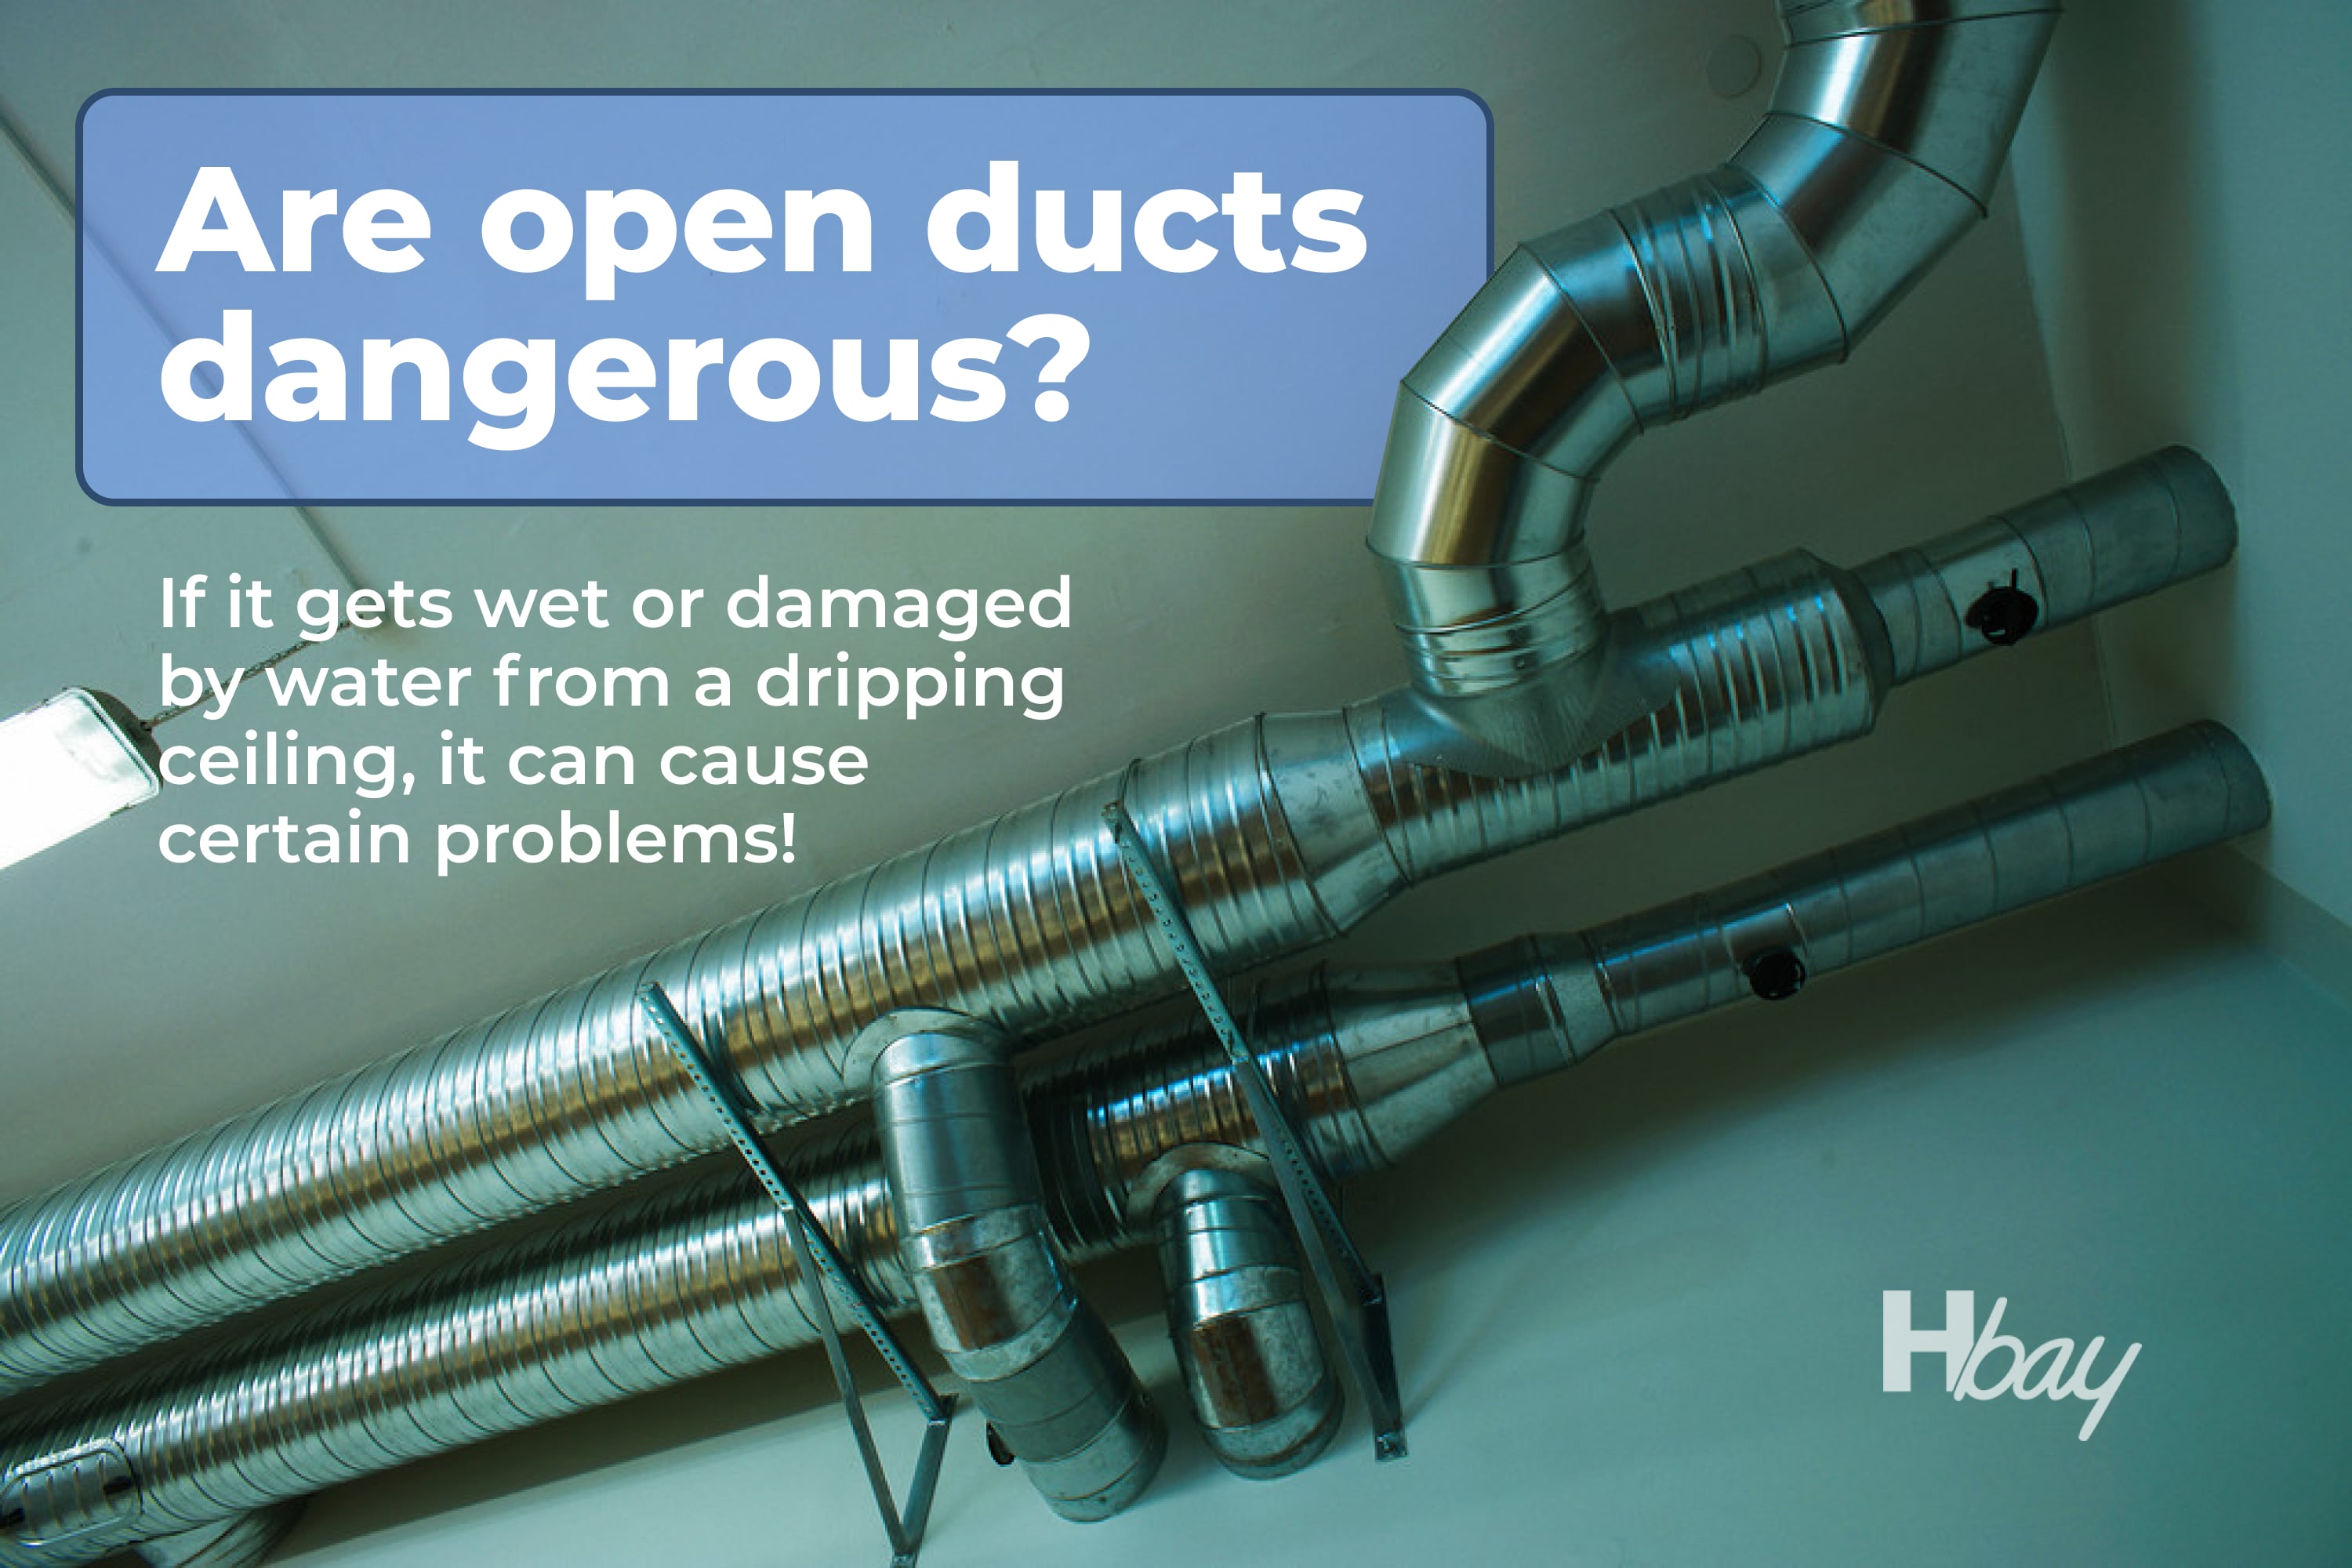 Are open ducts dangerous